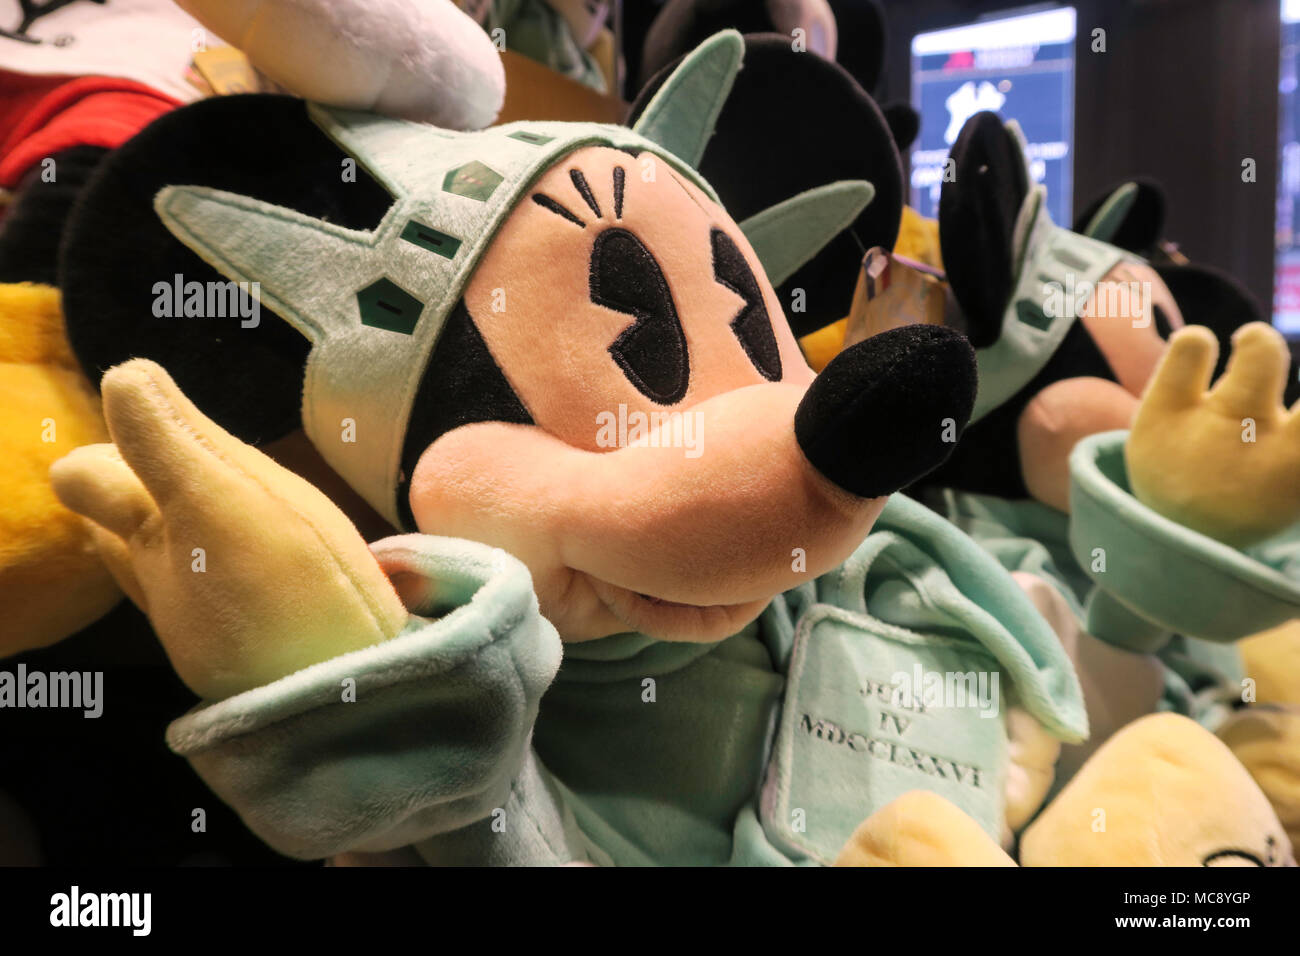 New York Souvenirs in the Disney Store in Times Square, NYC, USA Stock Photo